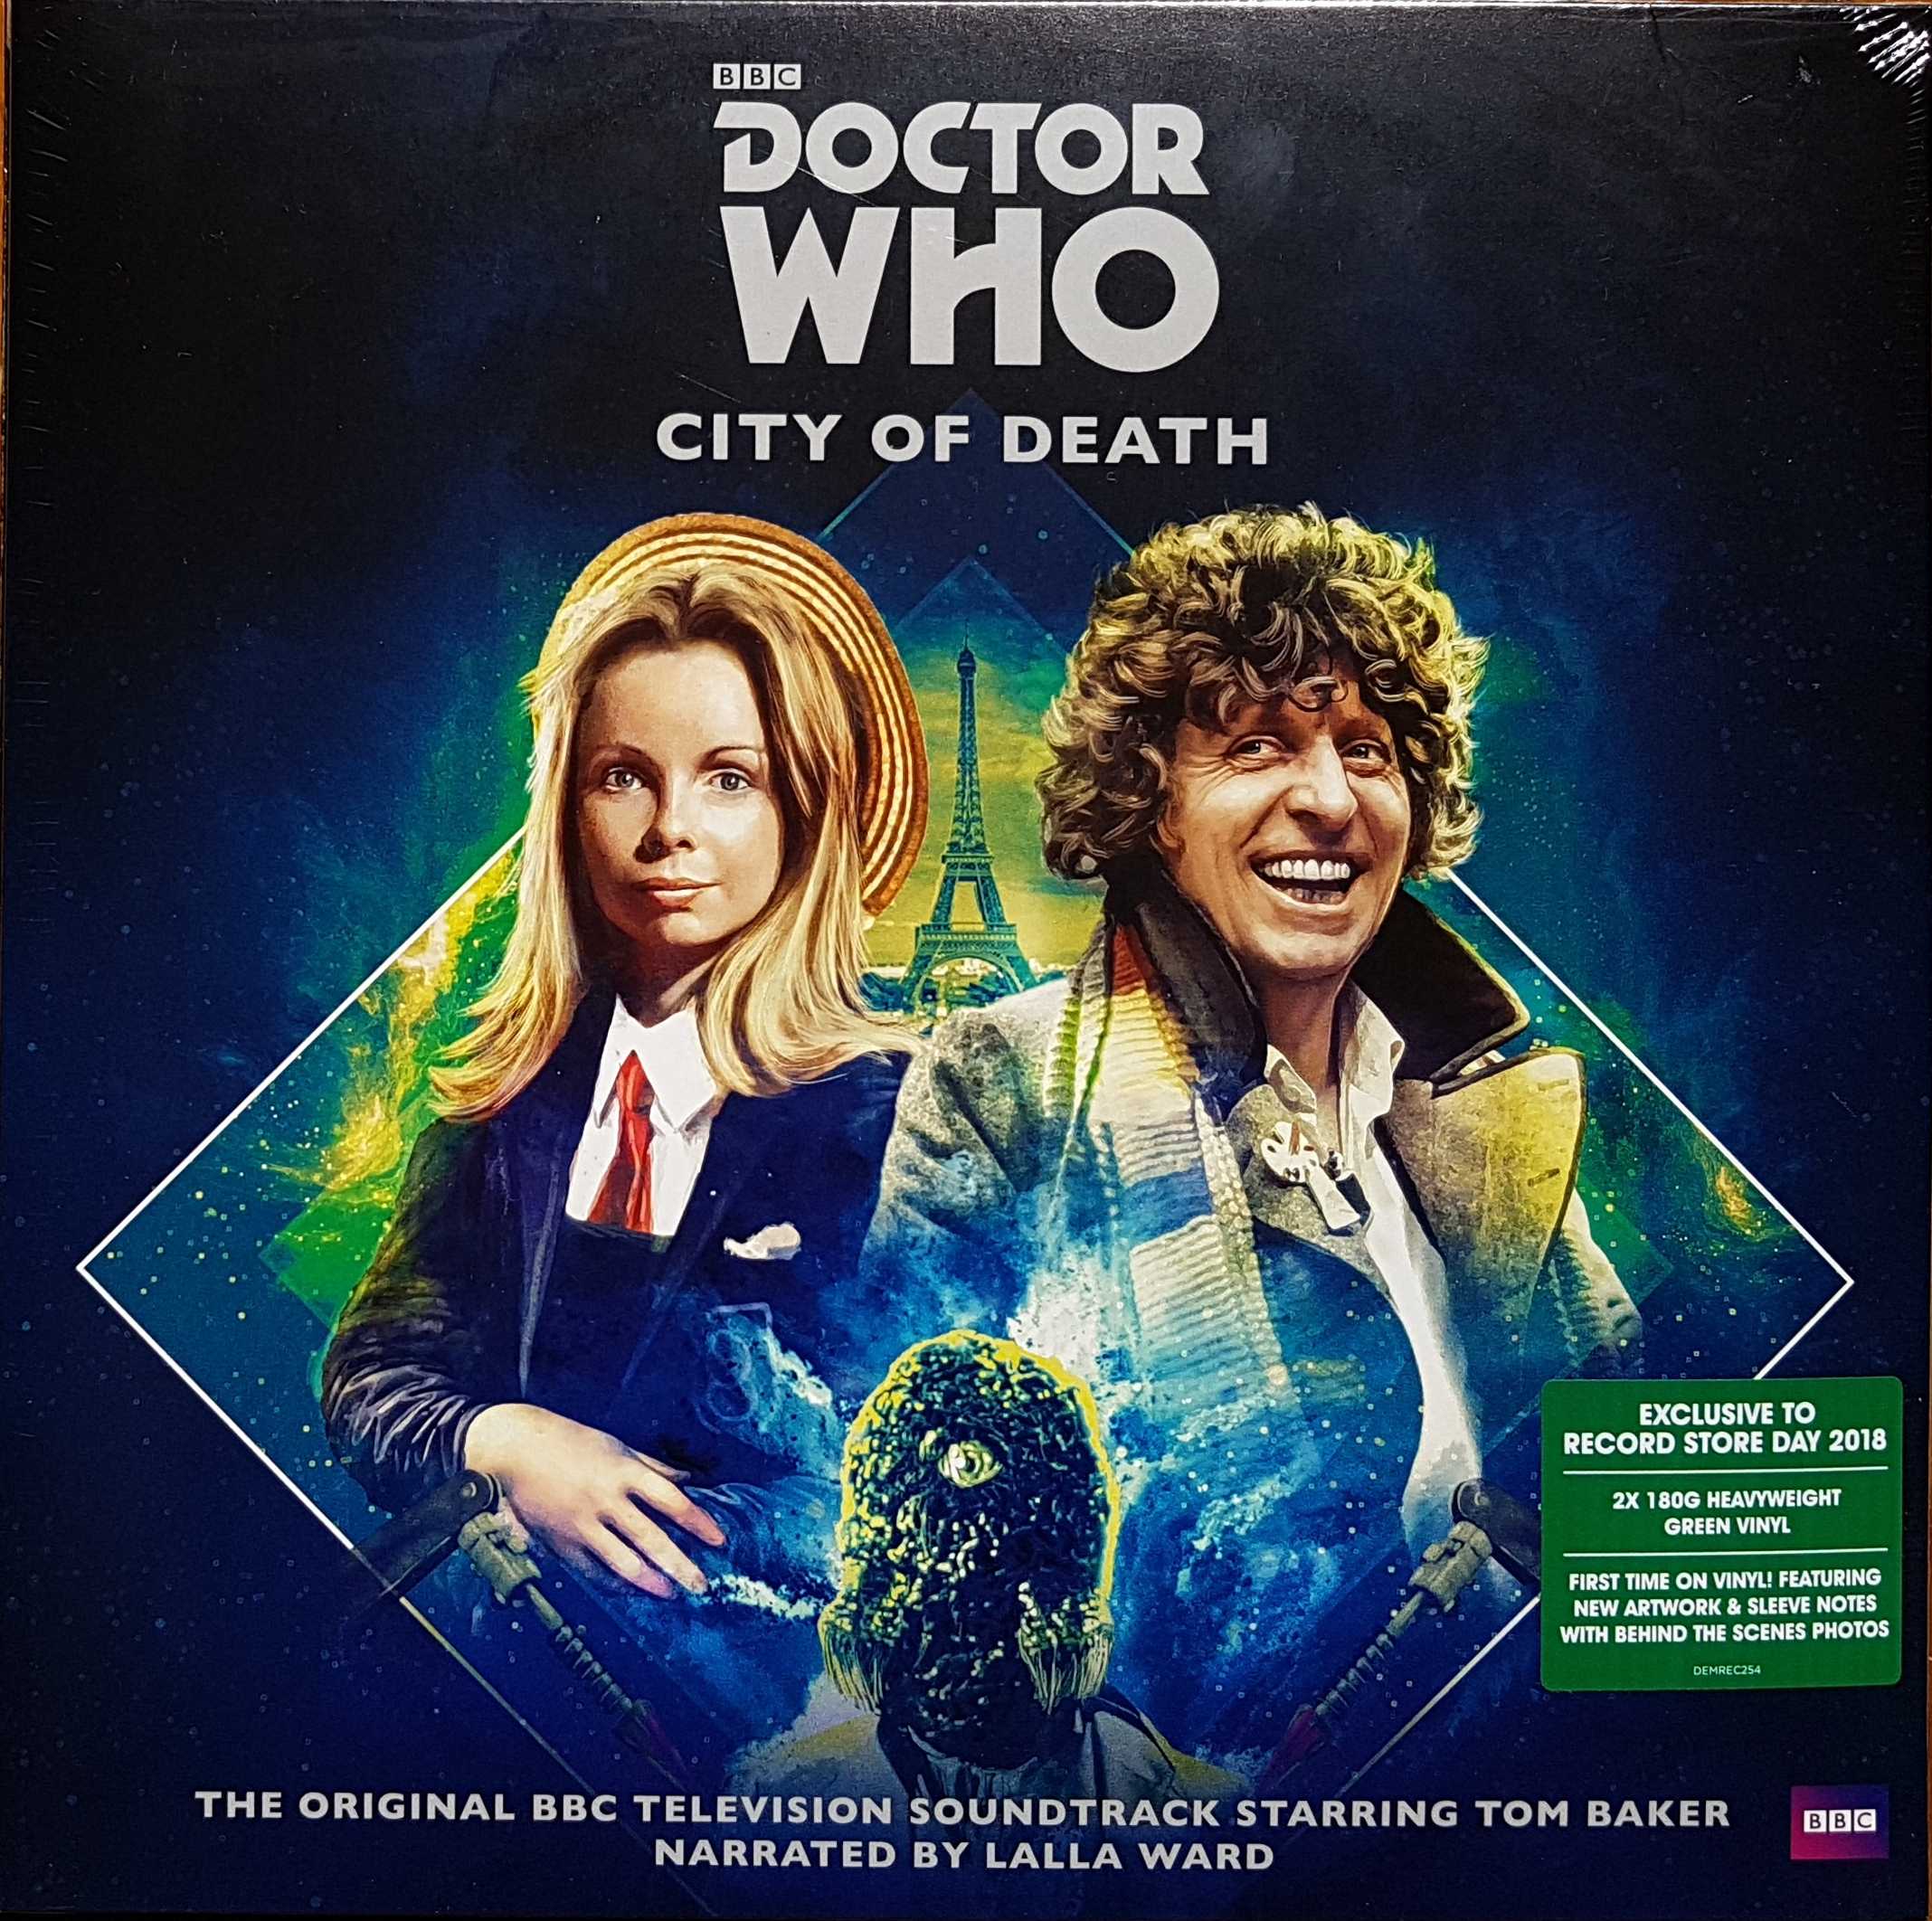 Picture of Doctor Who - City of death by artist David Agnew from the BBC albums - Records and Tapes library